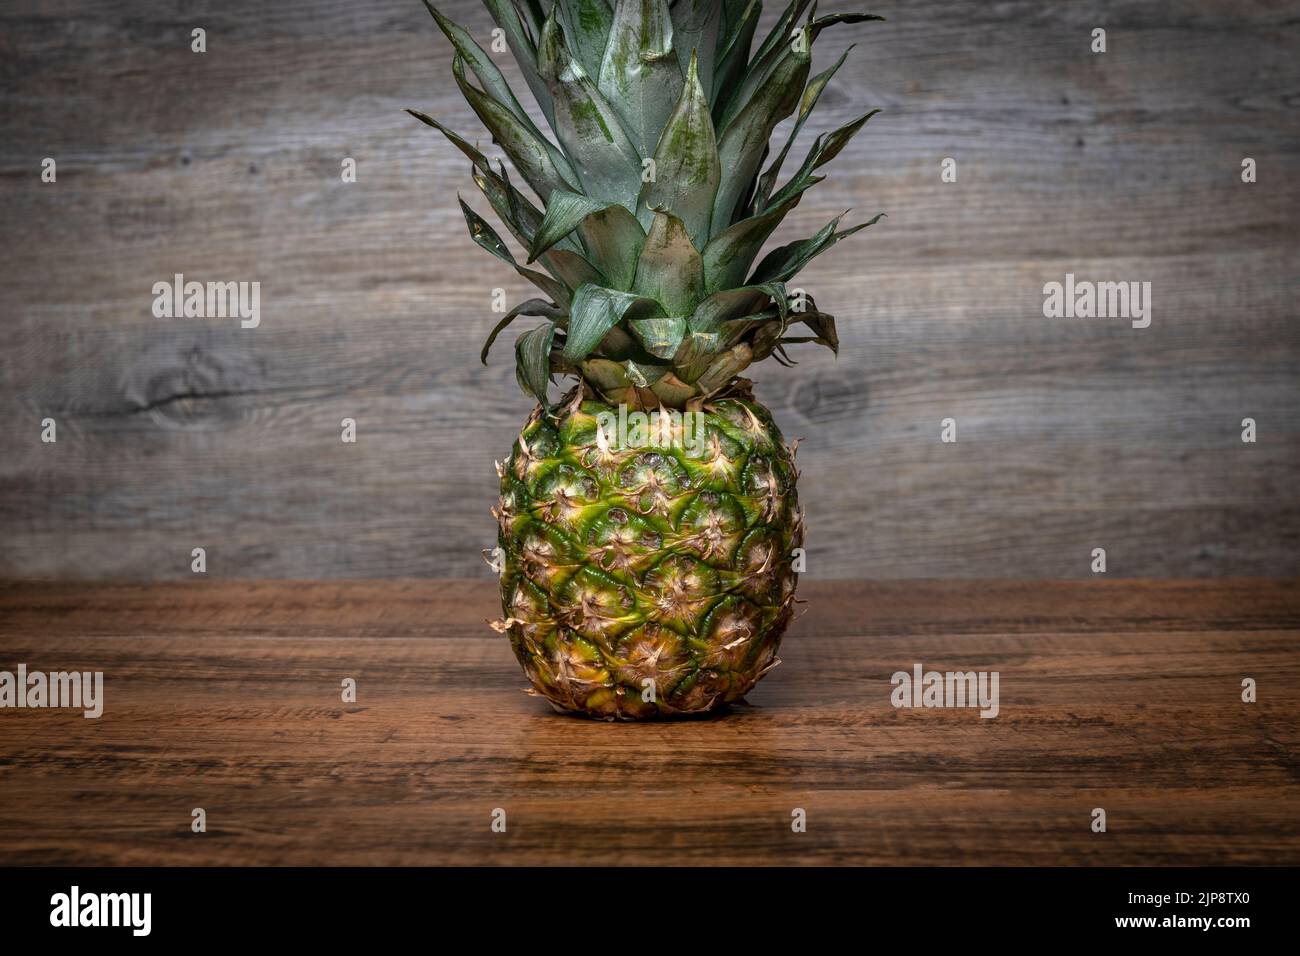 Pineapple on a wooden table Stock Photo